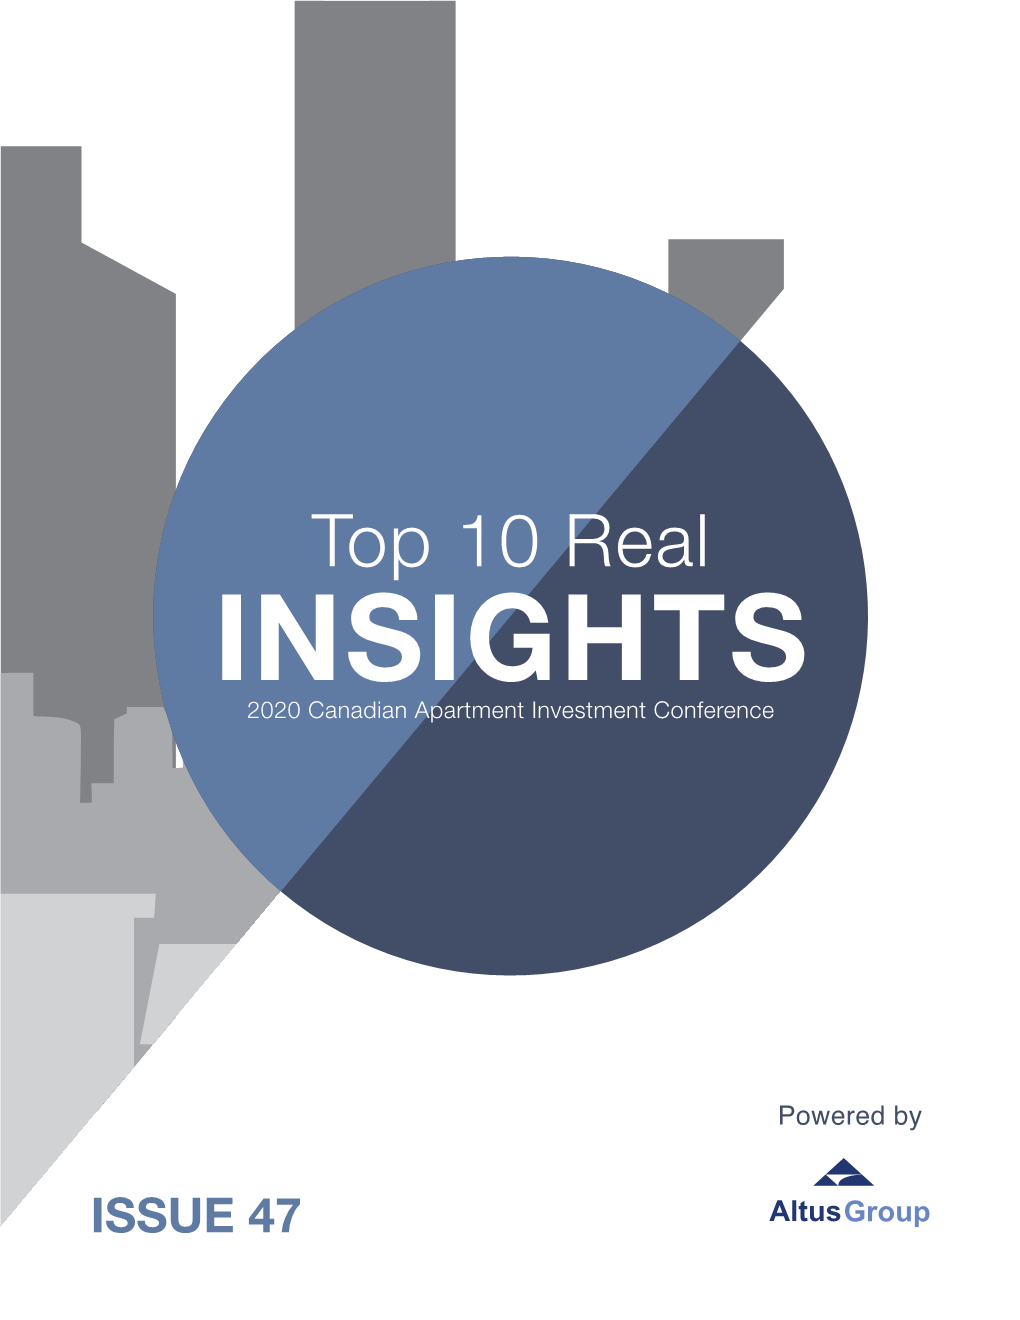 Top 10 Real INSIGHTS 2020 Canadian Apartment Investment Conference